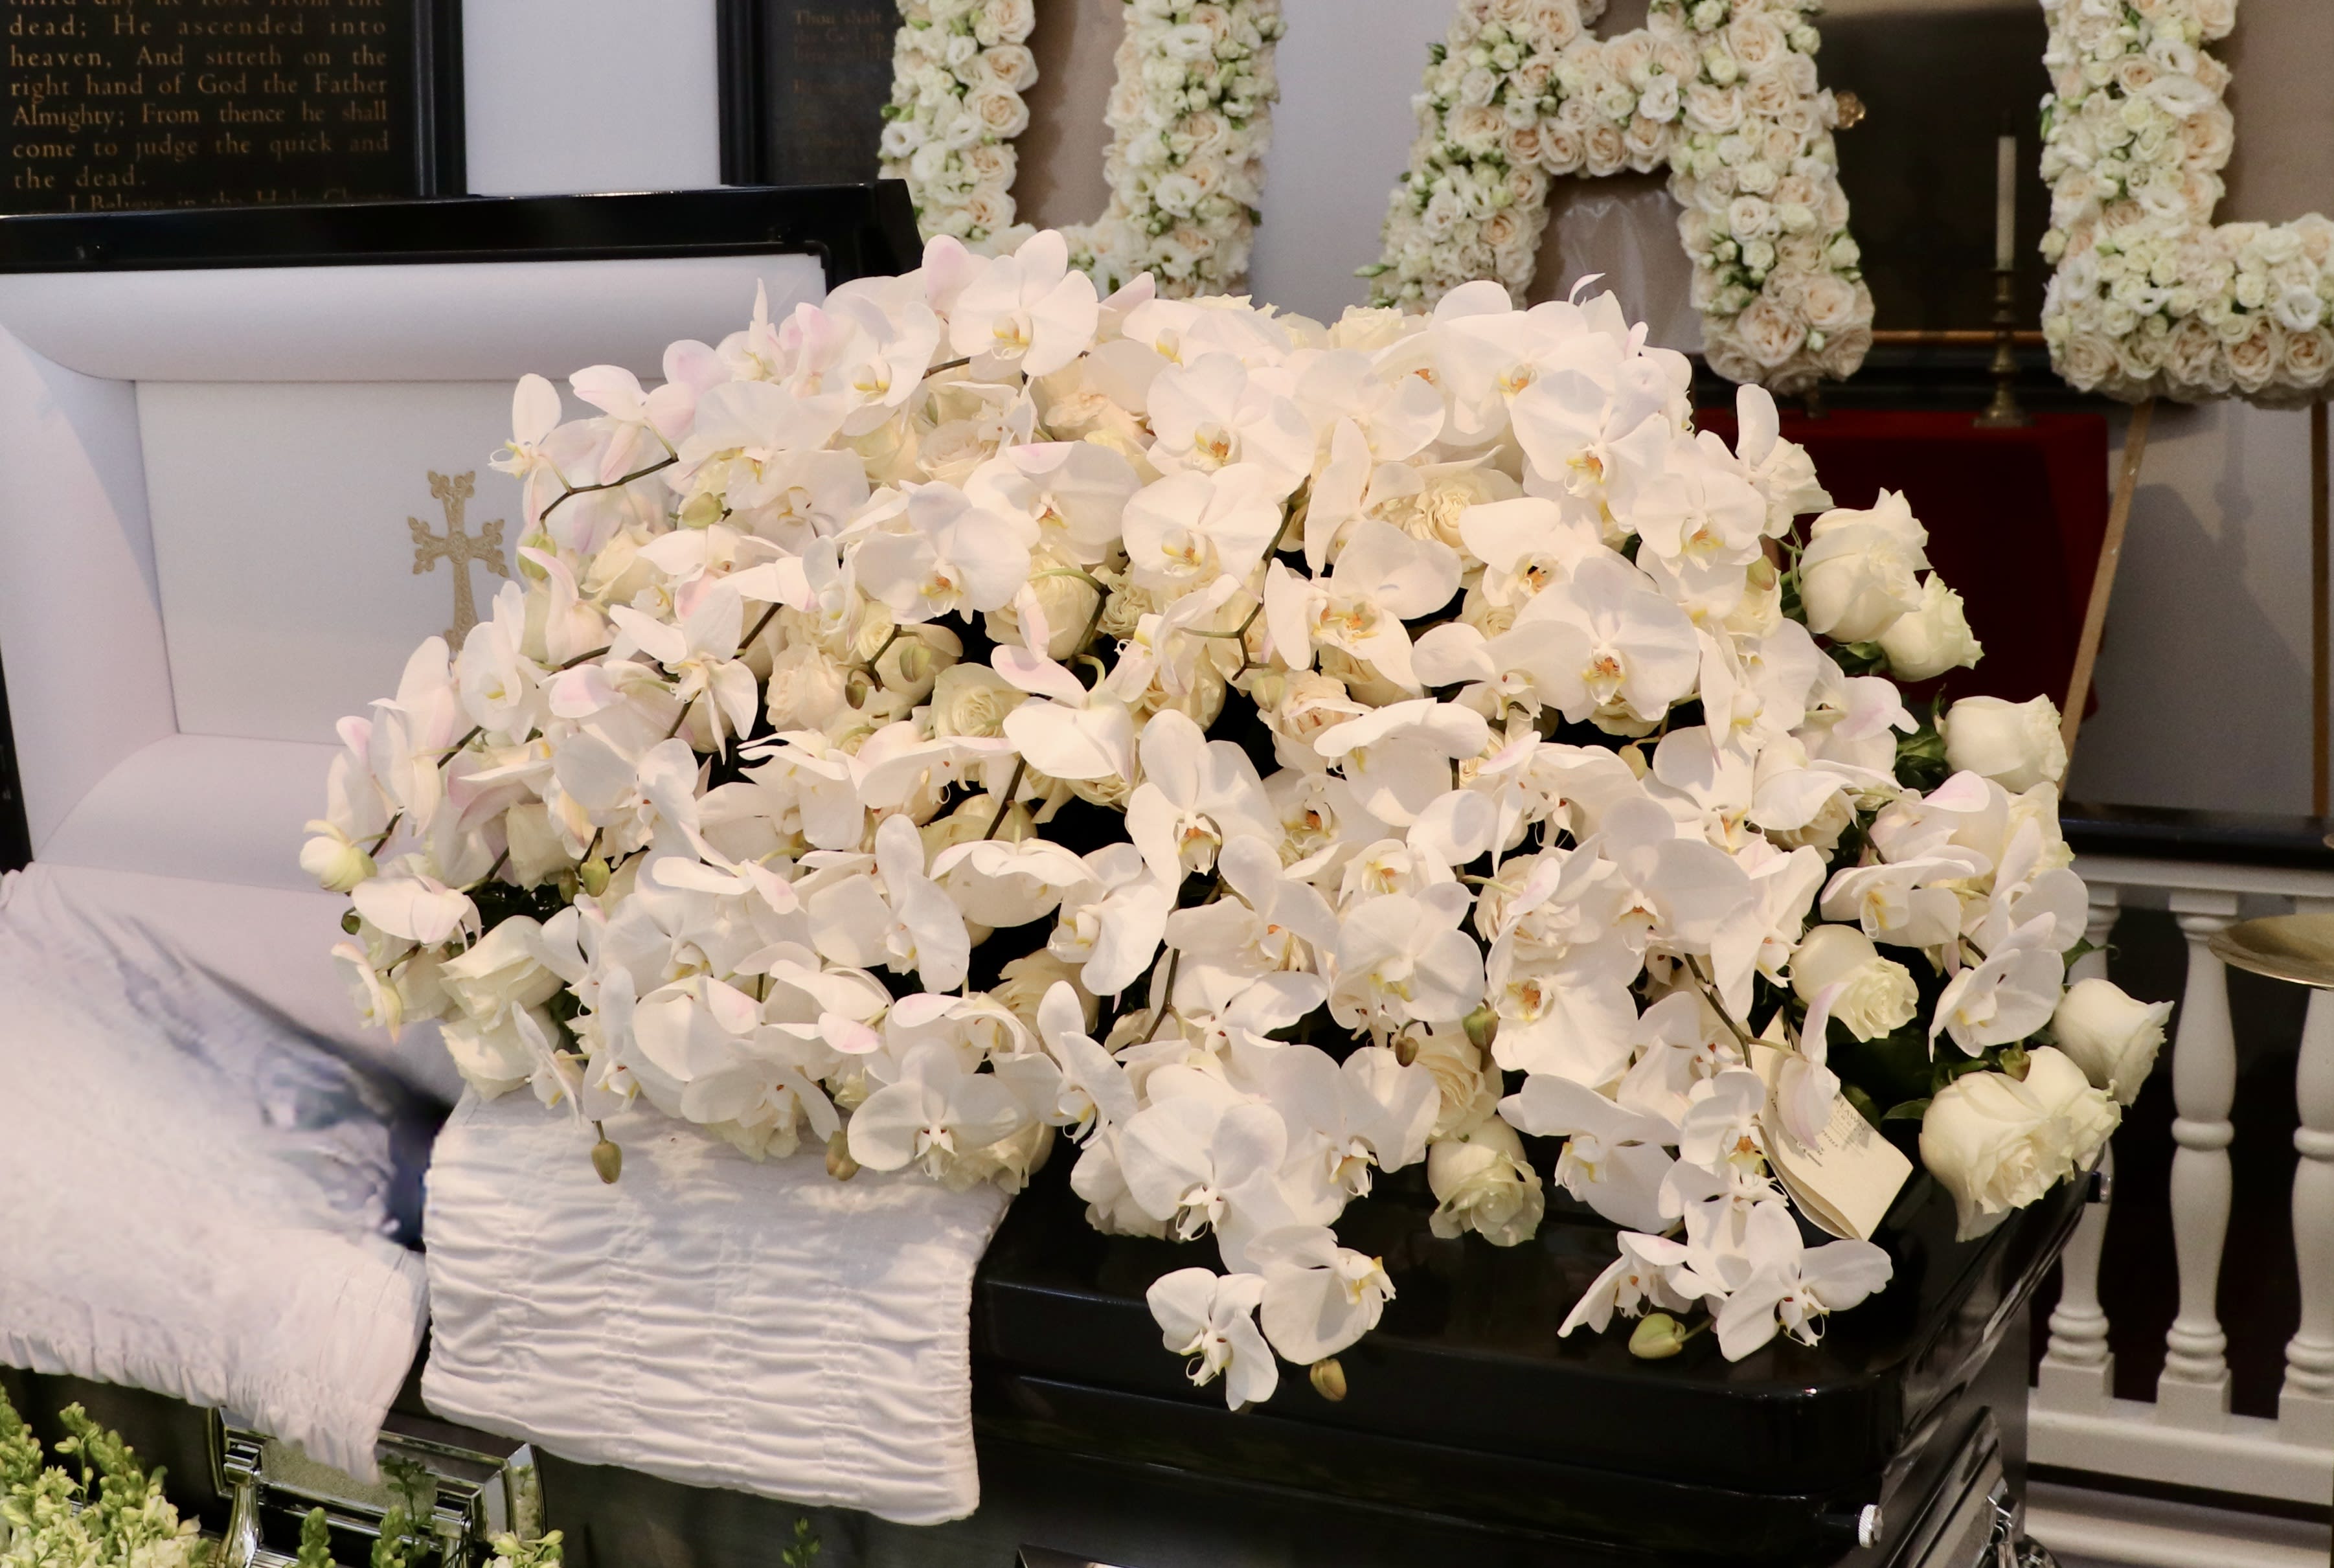 White Rose and Orchid Casket Spray - My Glendale Florist - This casket display is made with premium white roses and beautiful cascading orchids.